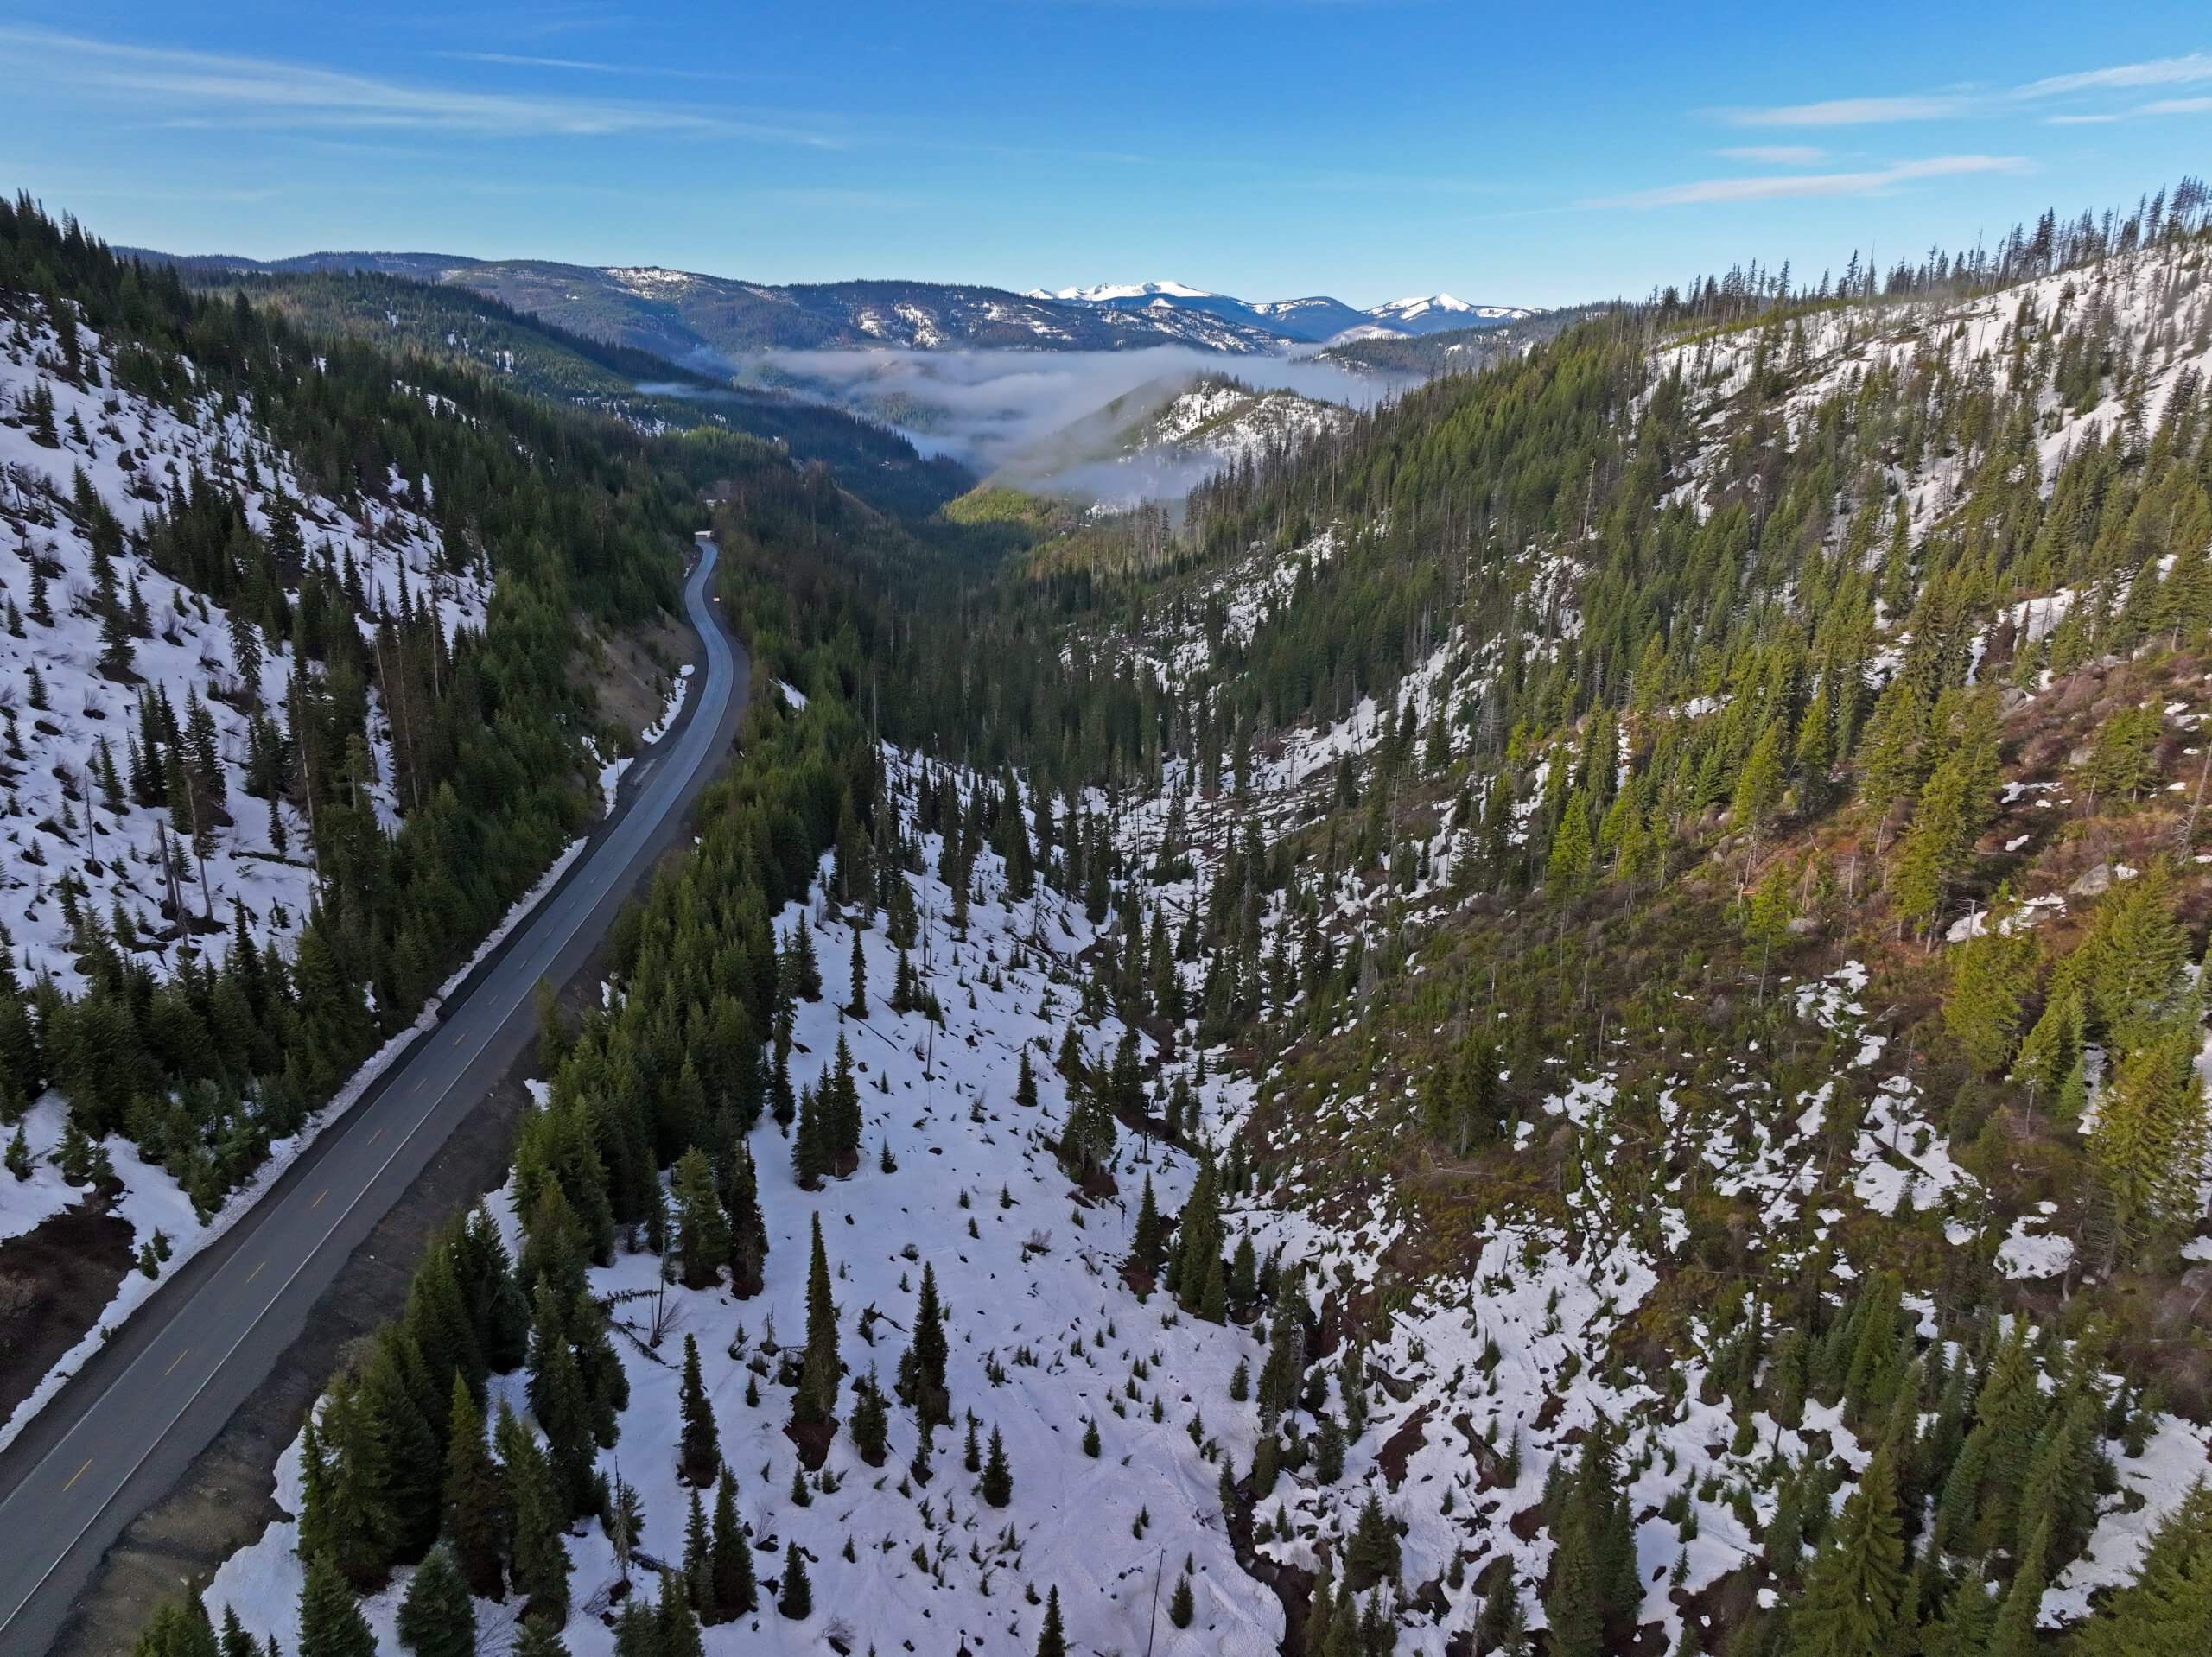 Aerial view of a snowy canyon beside a road.